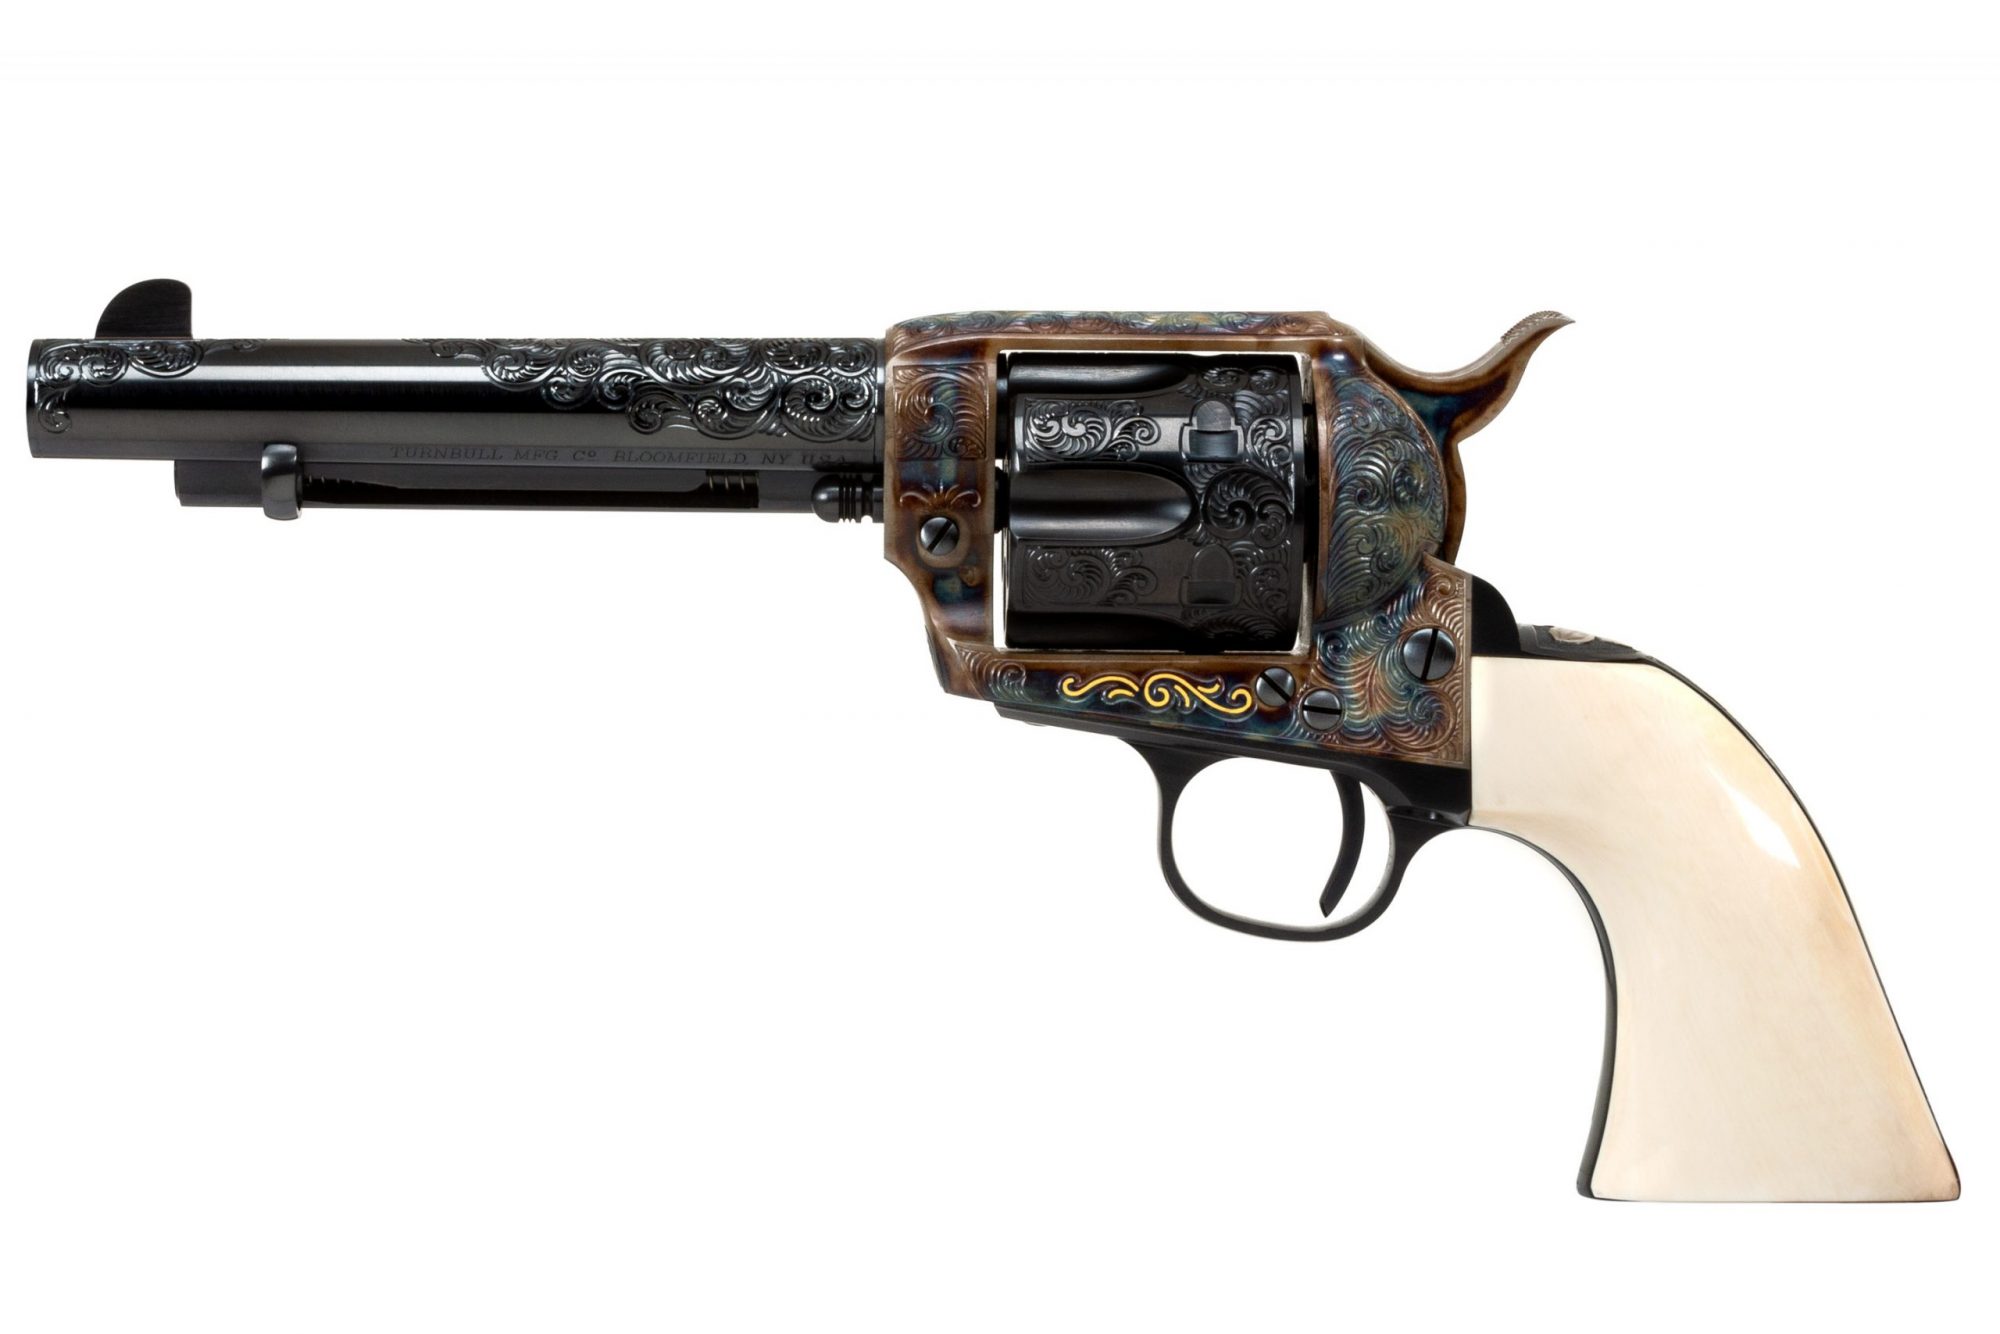 Photo of an engraved Colt SAA reproduction revolver, made by Turnbull Restoration, featuring bone charcoal color case hardening